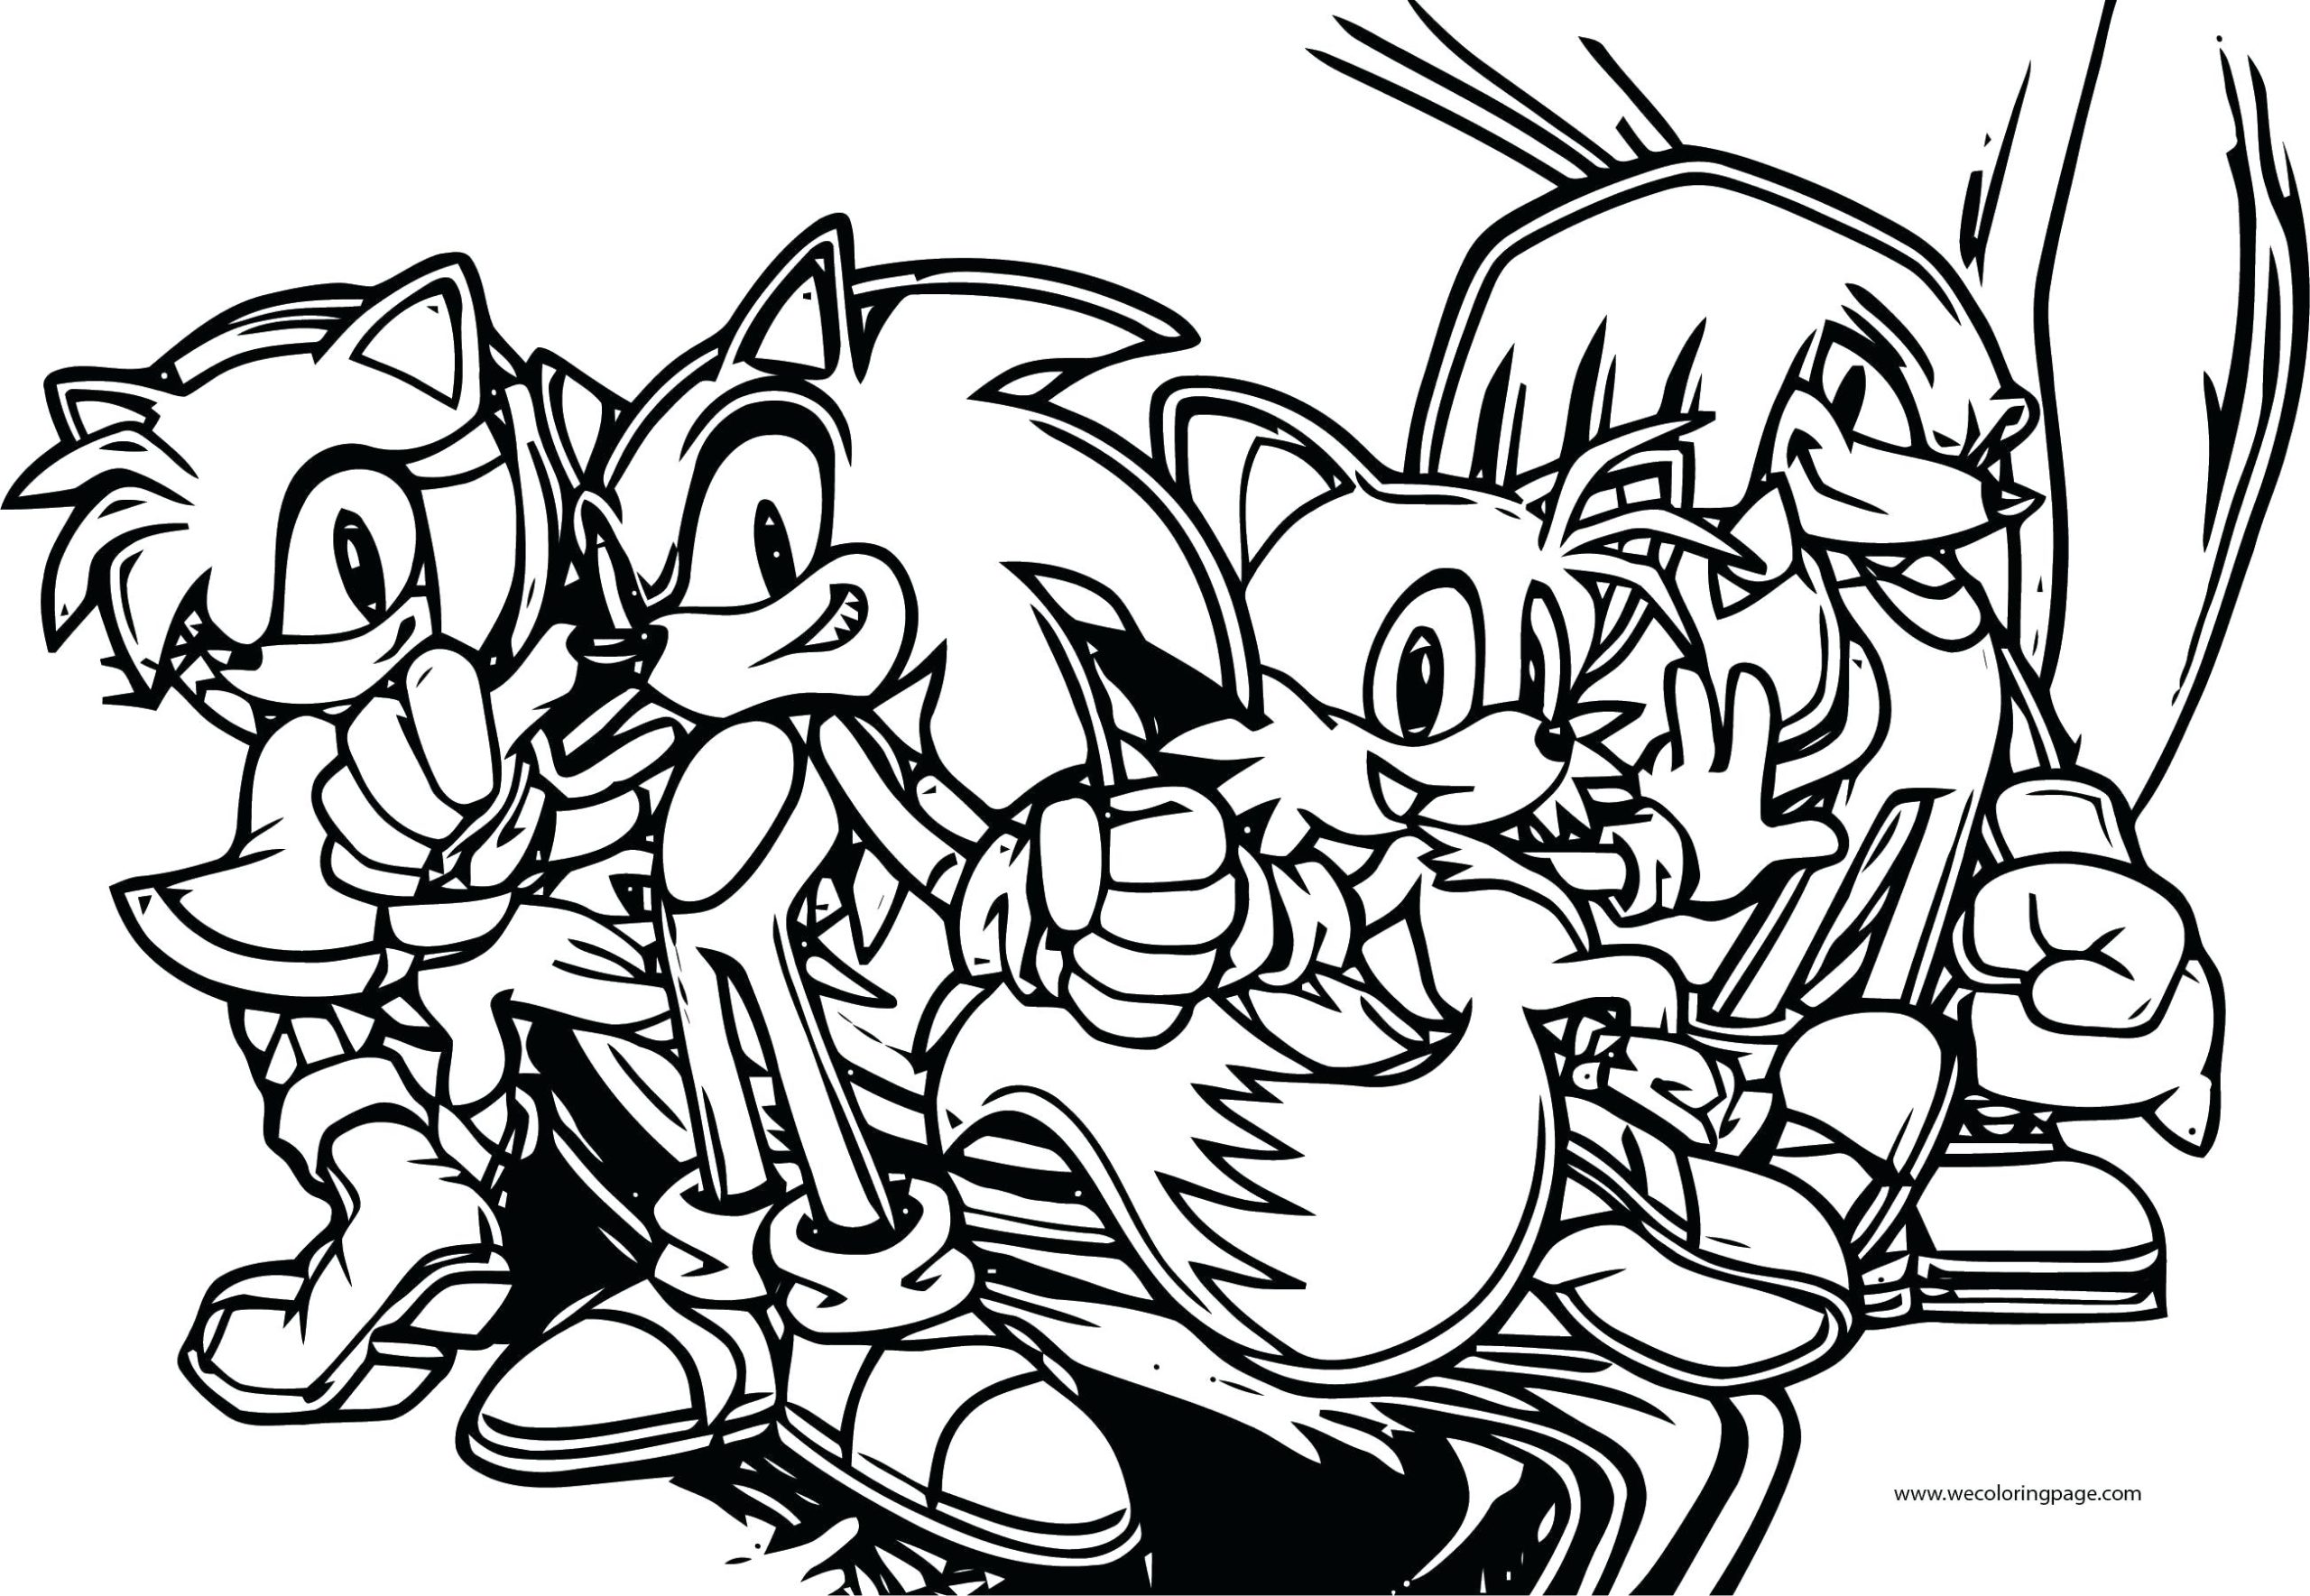 Sonic And Friends Coloring Pages Printable